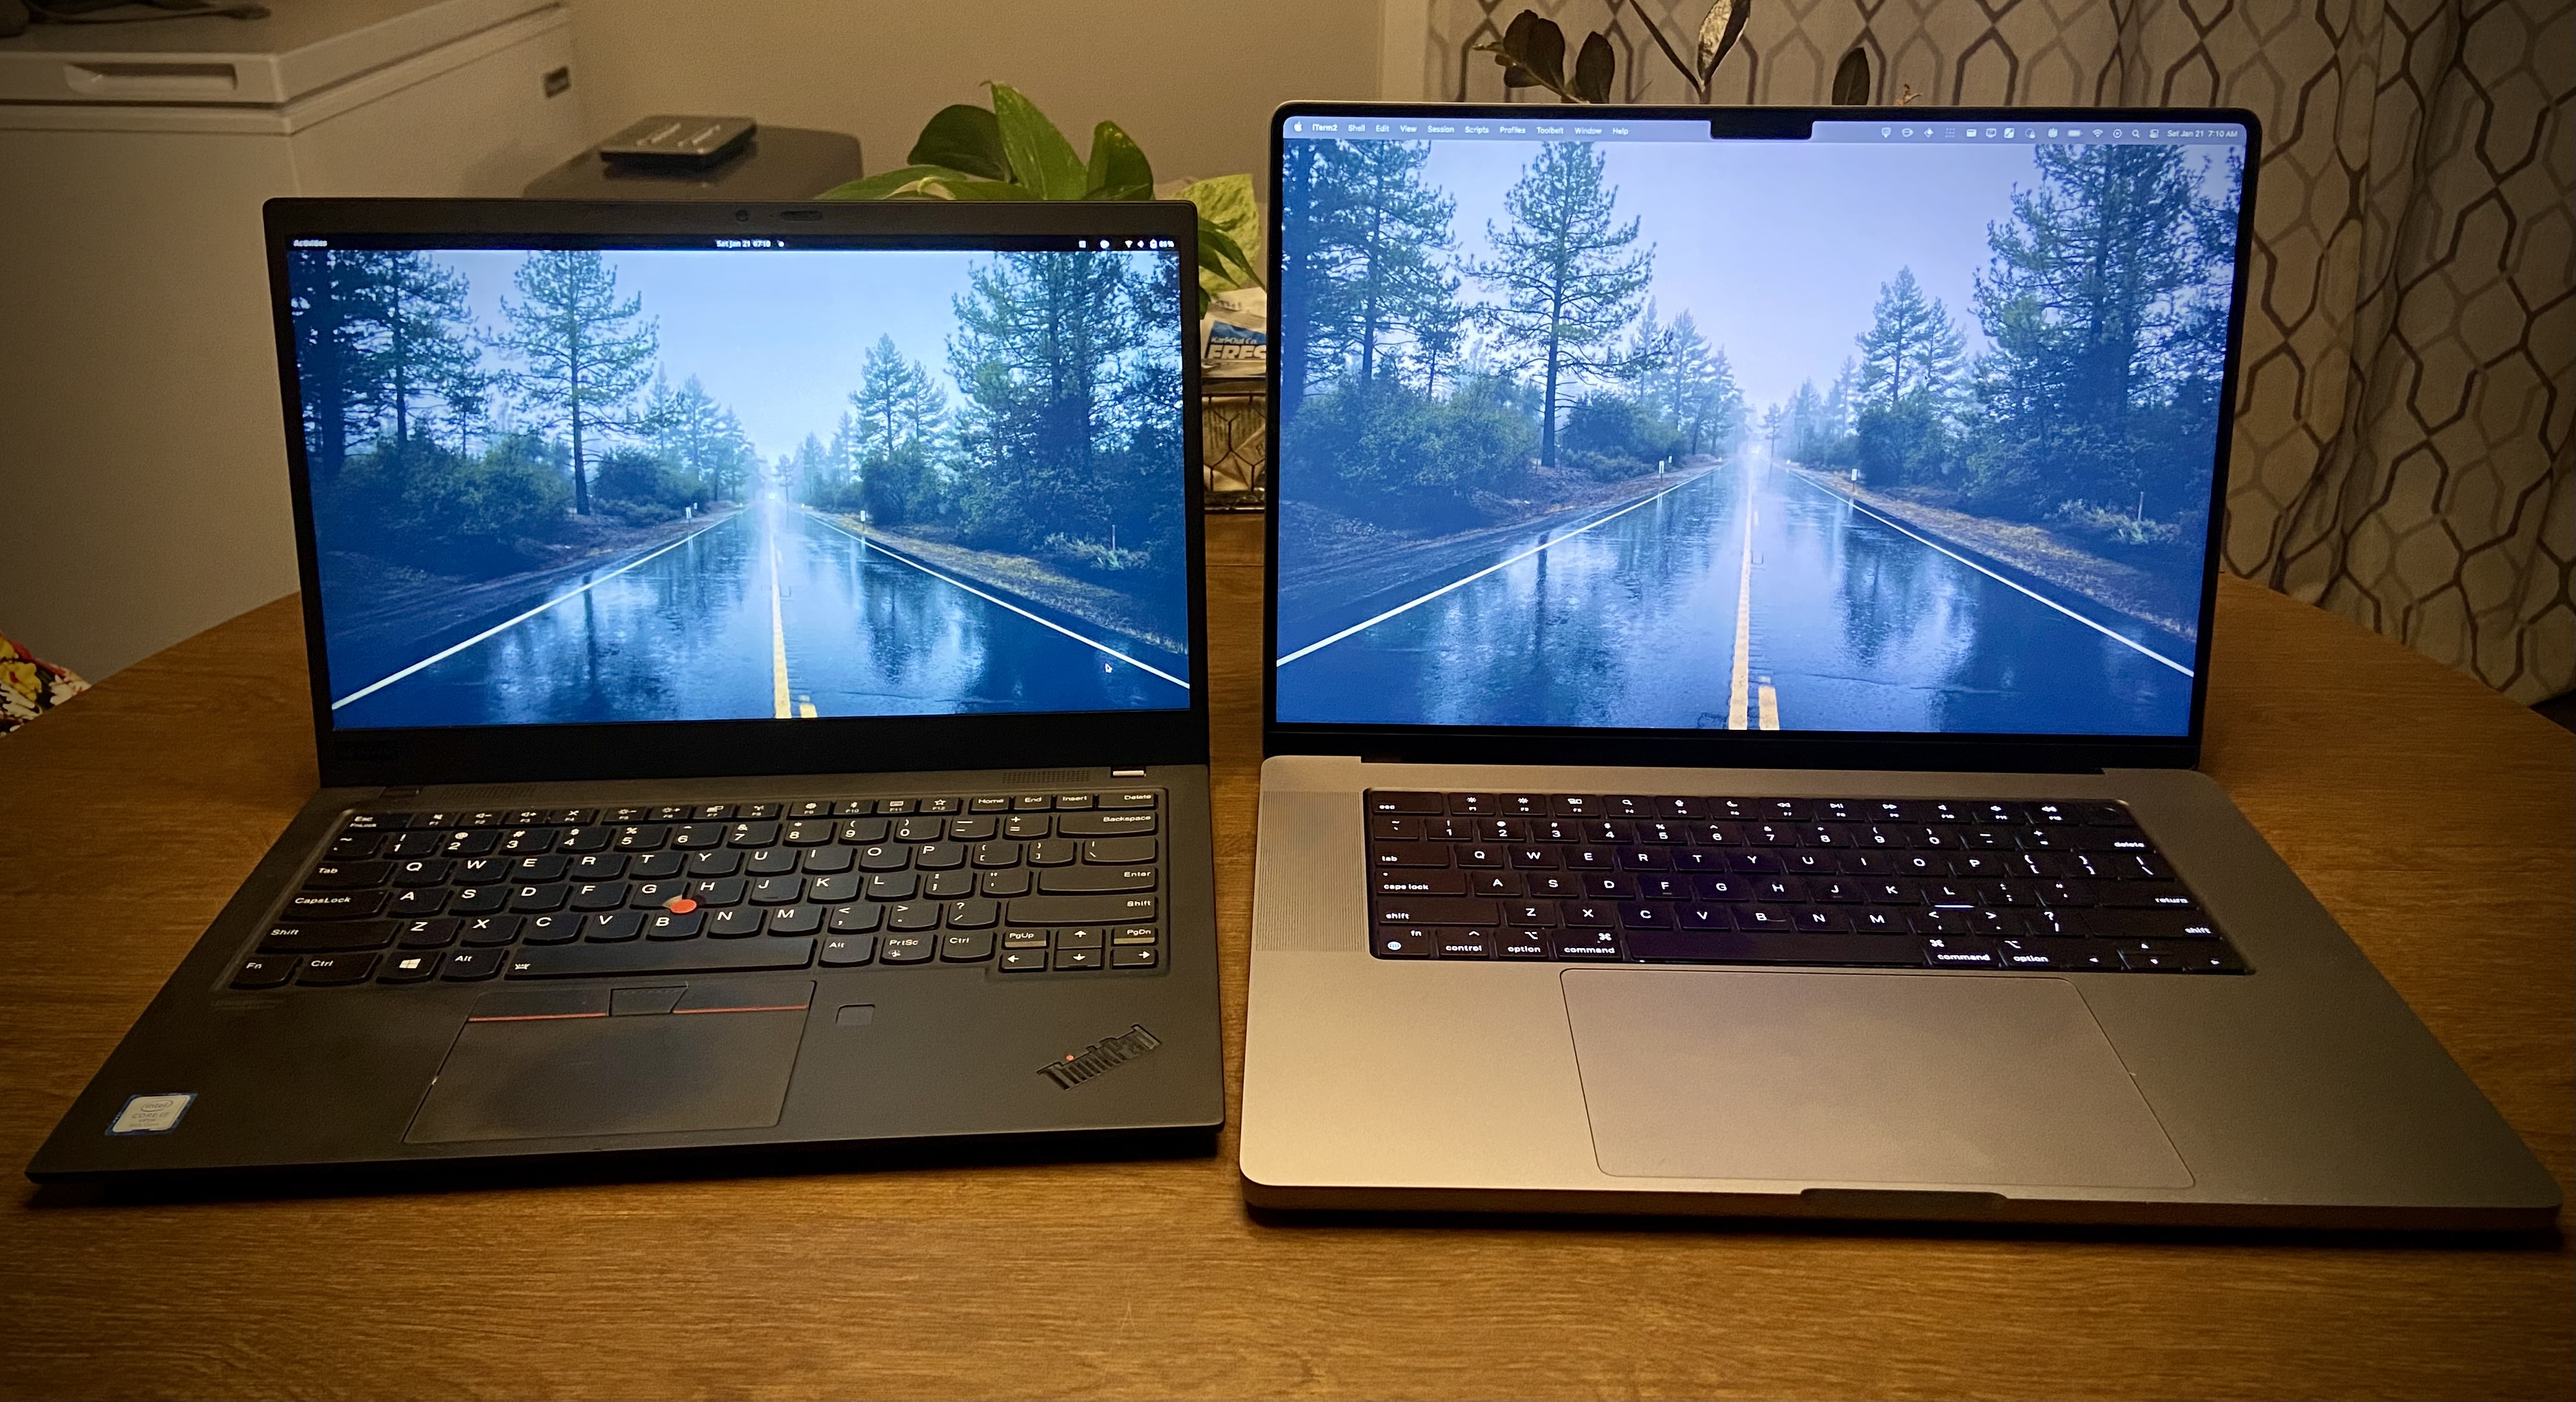 My x1 Carbon next to he 16 m1 pro mbp